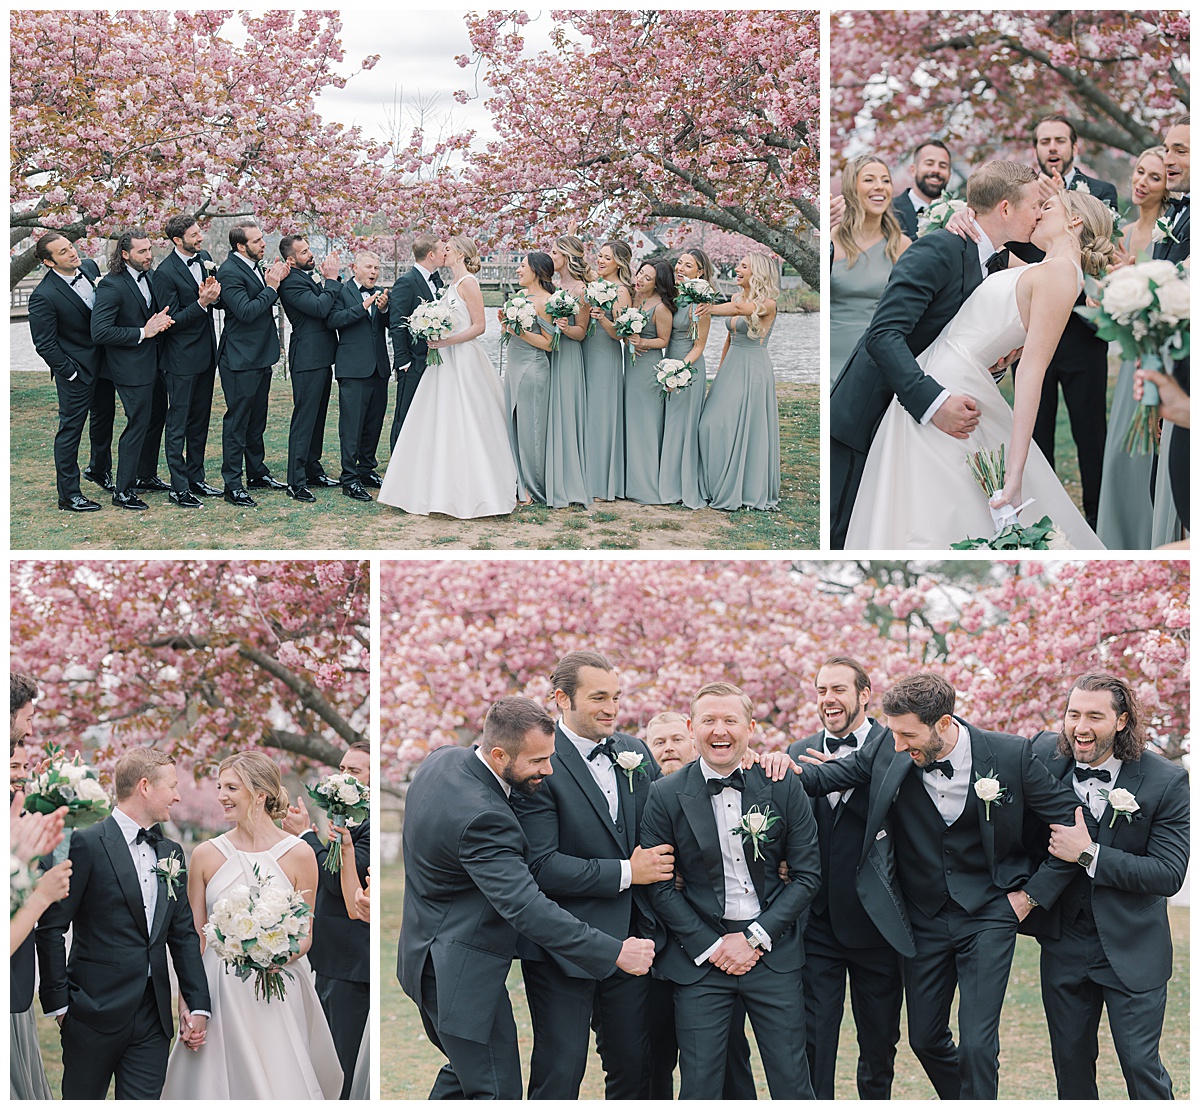 Bride and groom with bridal party in sage dresses and black tuxedos under the cherry blossoms. 